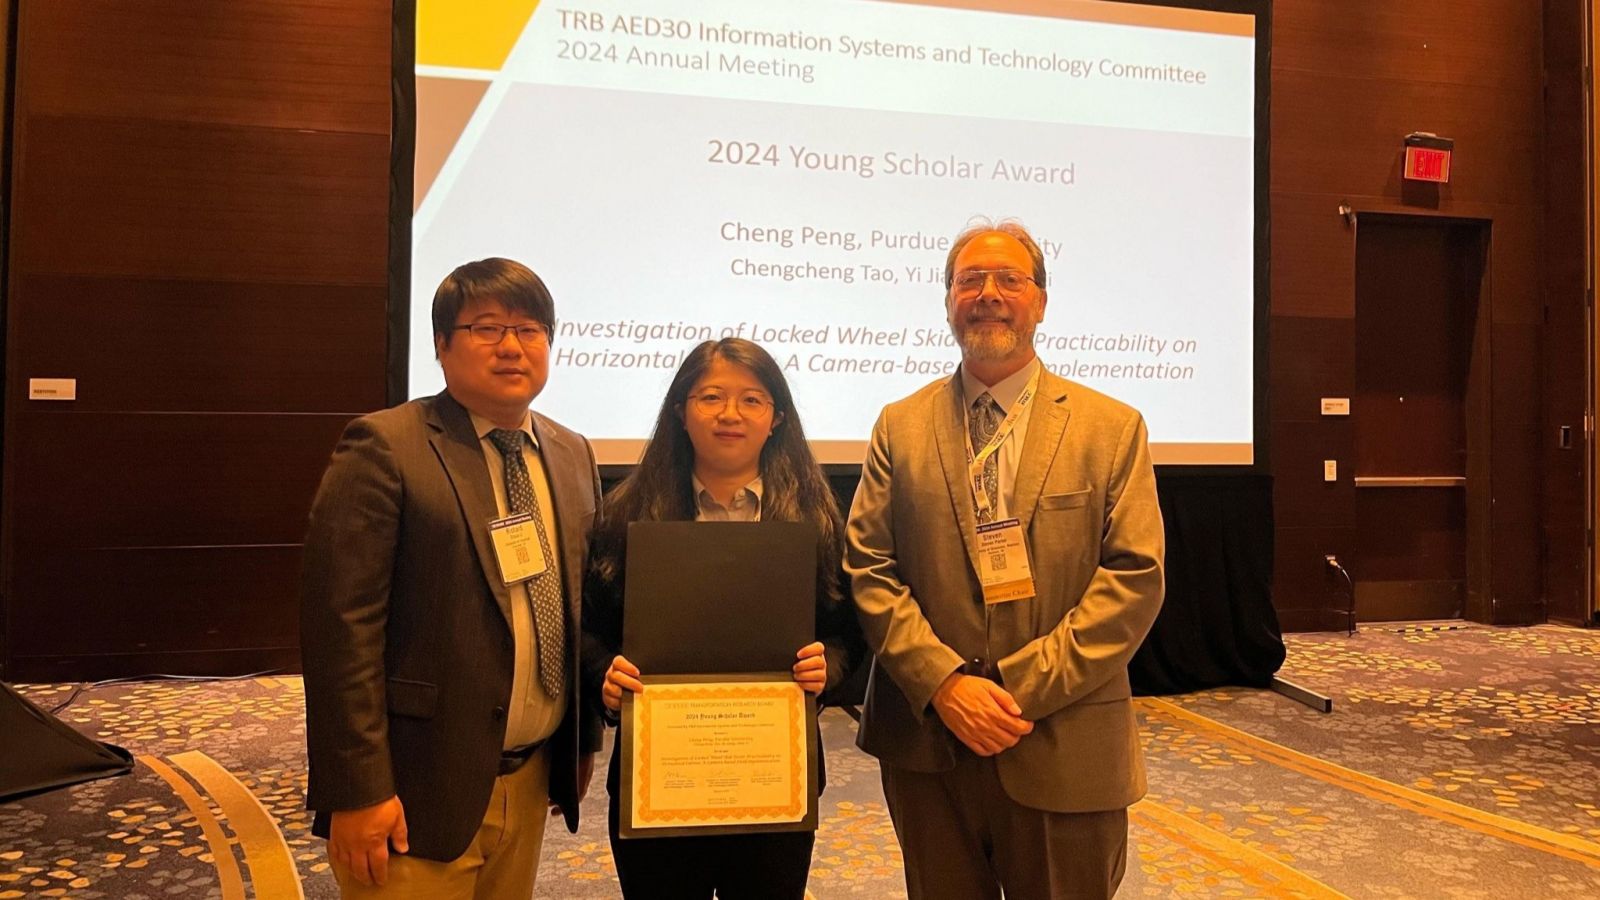 Cheng Peng (center) receives TRB's Young Scholar Award at their 2024 Annual Meeting. (Photo provided)